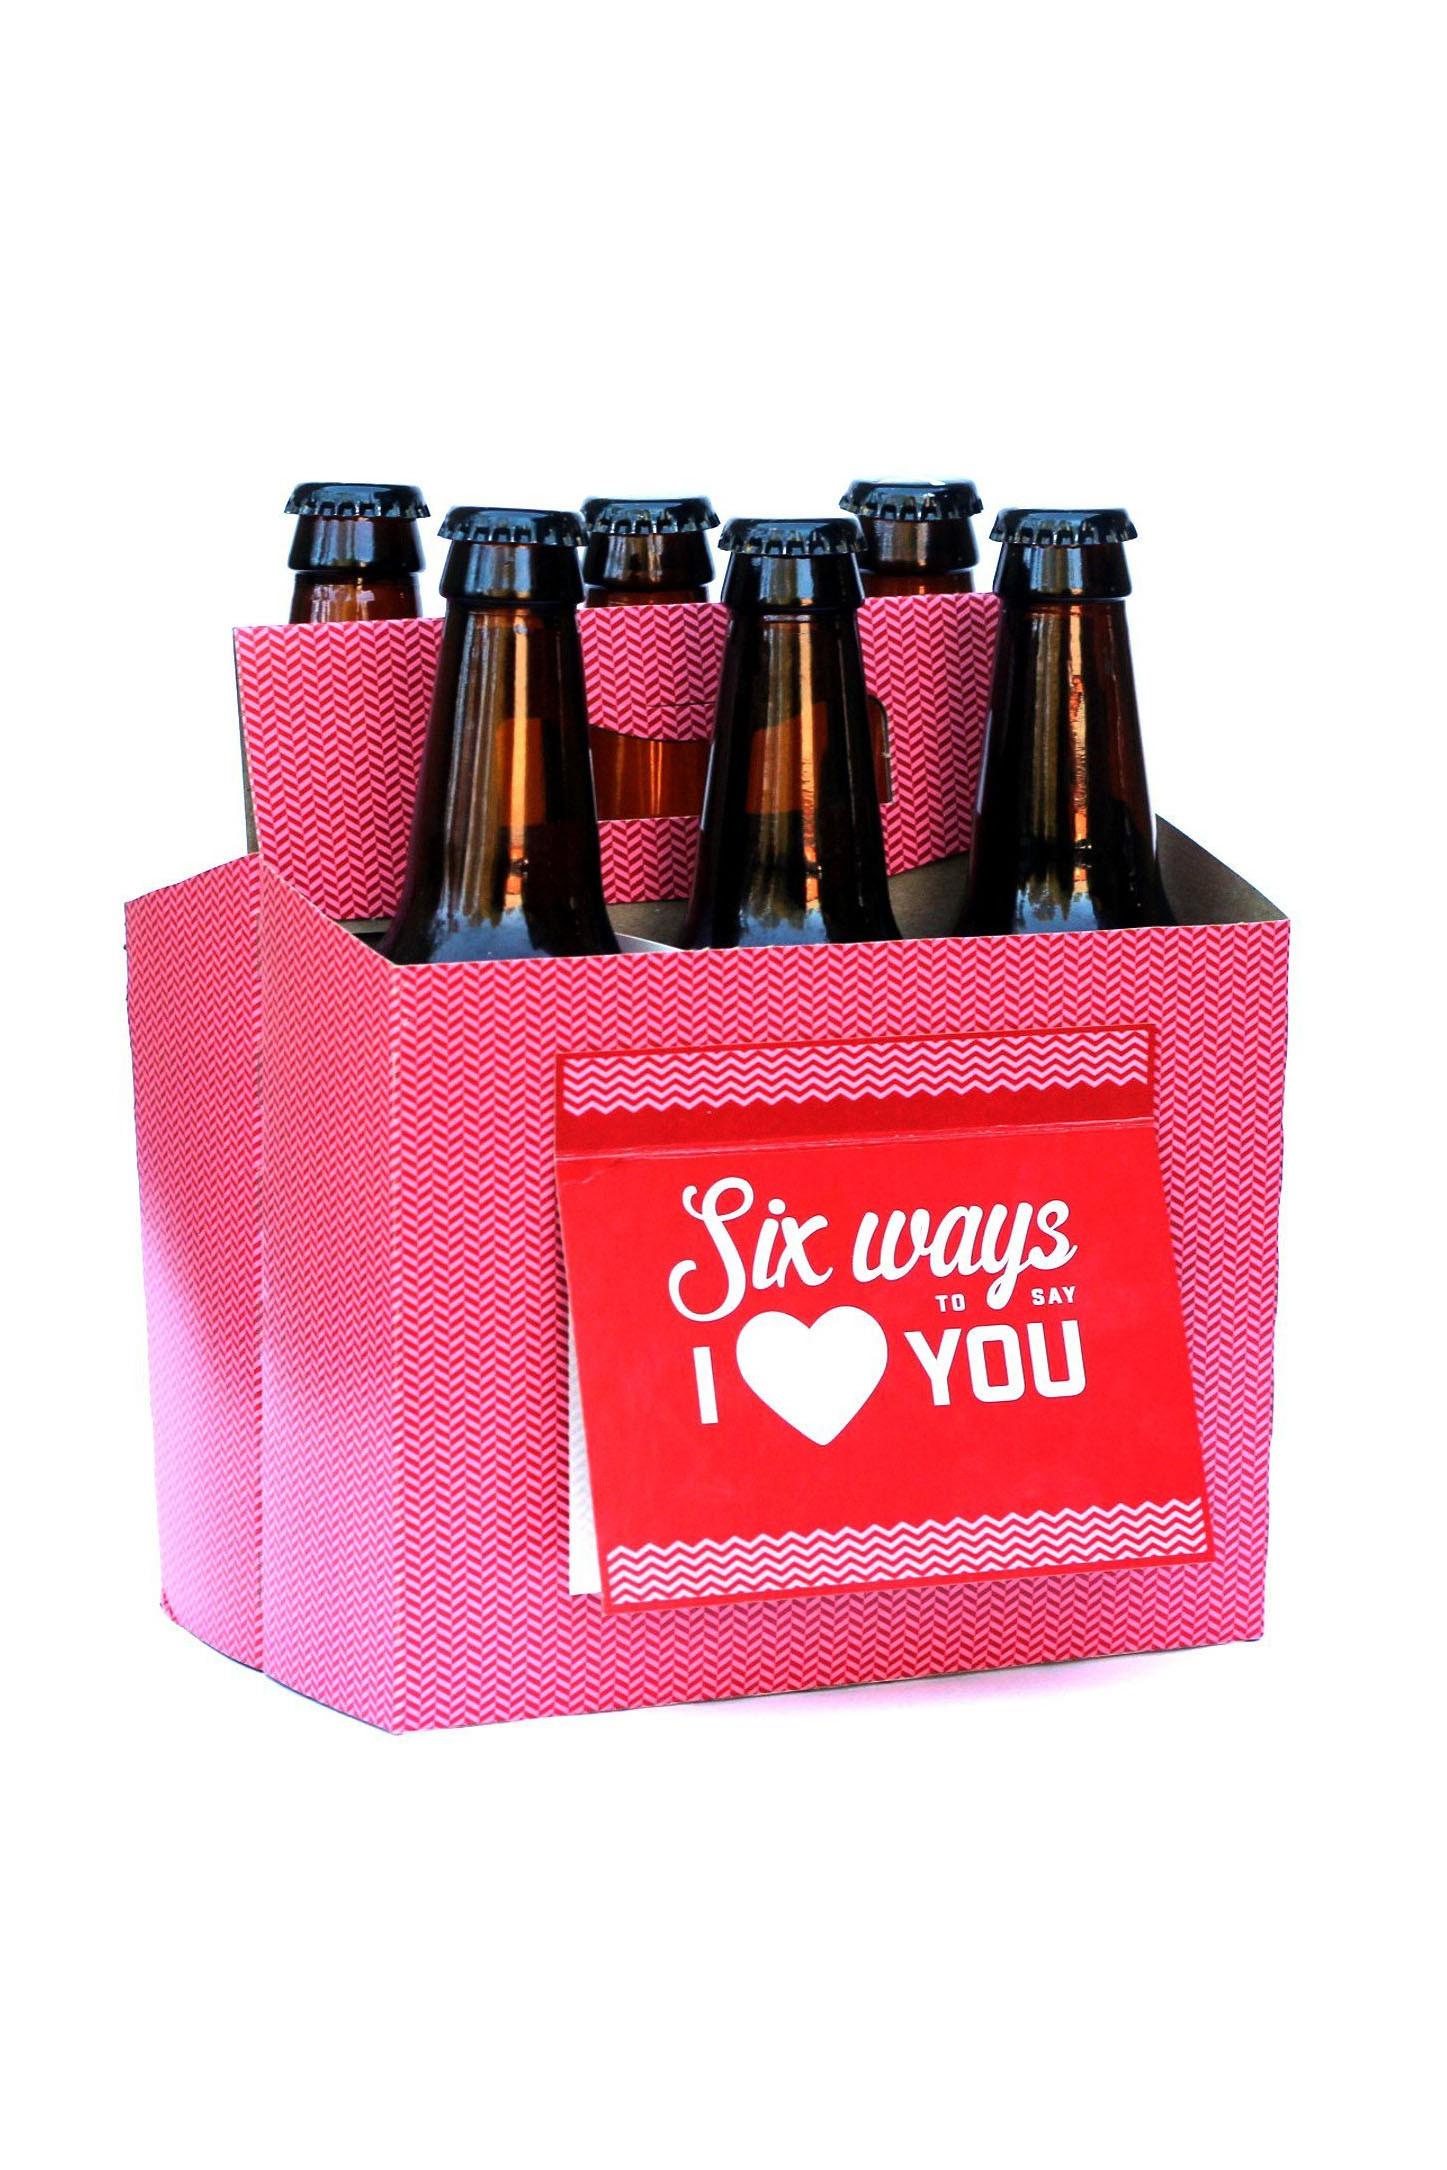 Unique Valentine Gift Ideas
 Beer Gift Ideas For Him